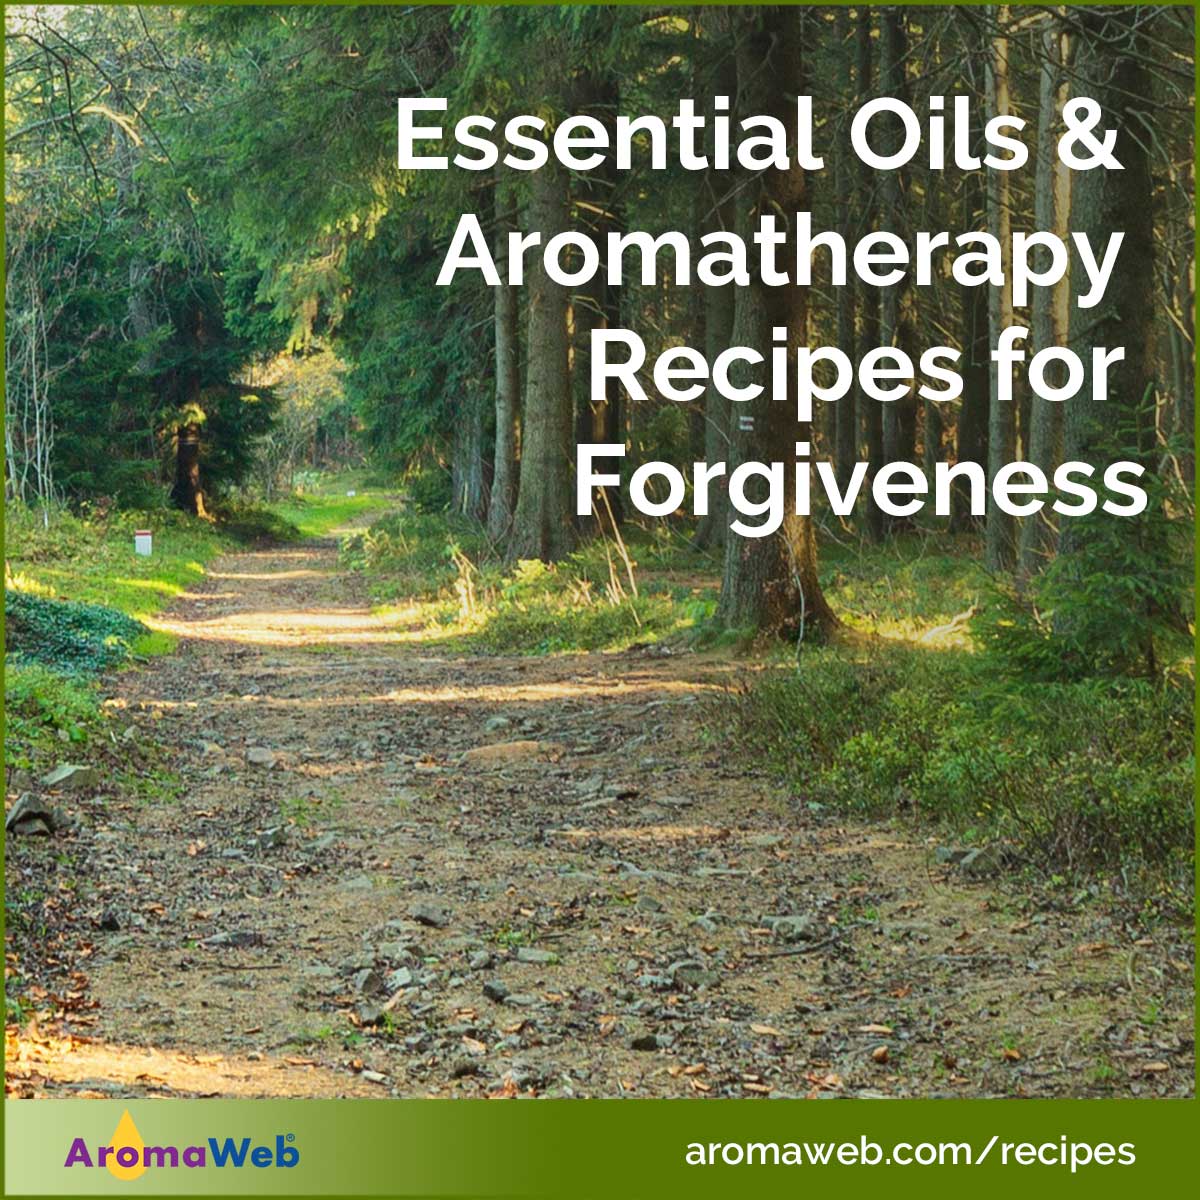 Essential Oils and Aromatherapy Recipes for Forgiveness